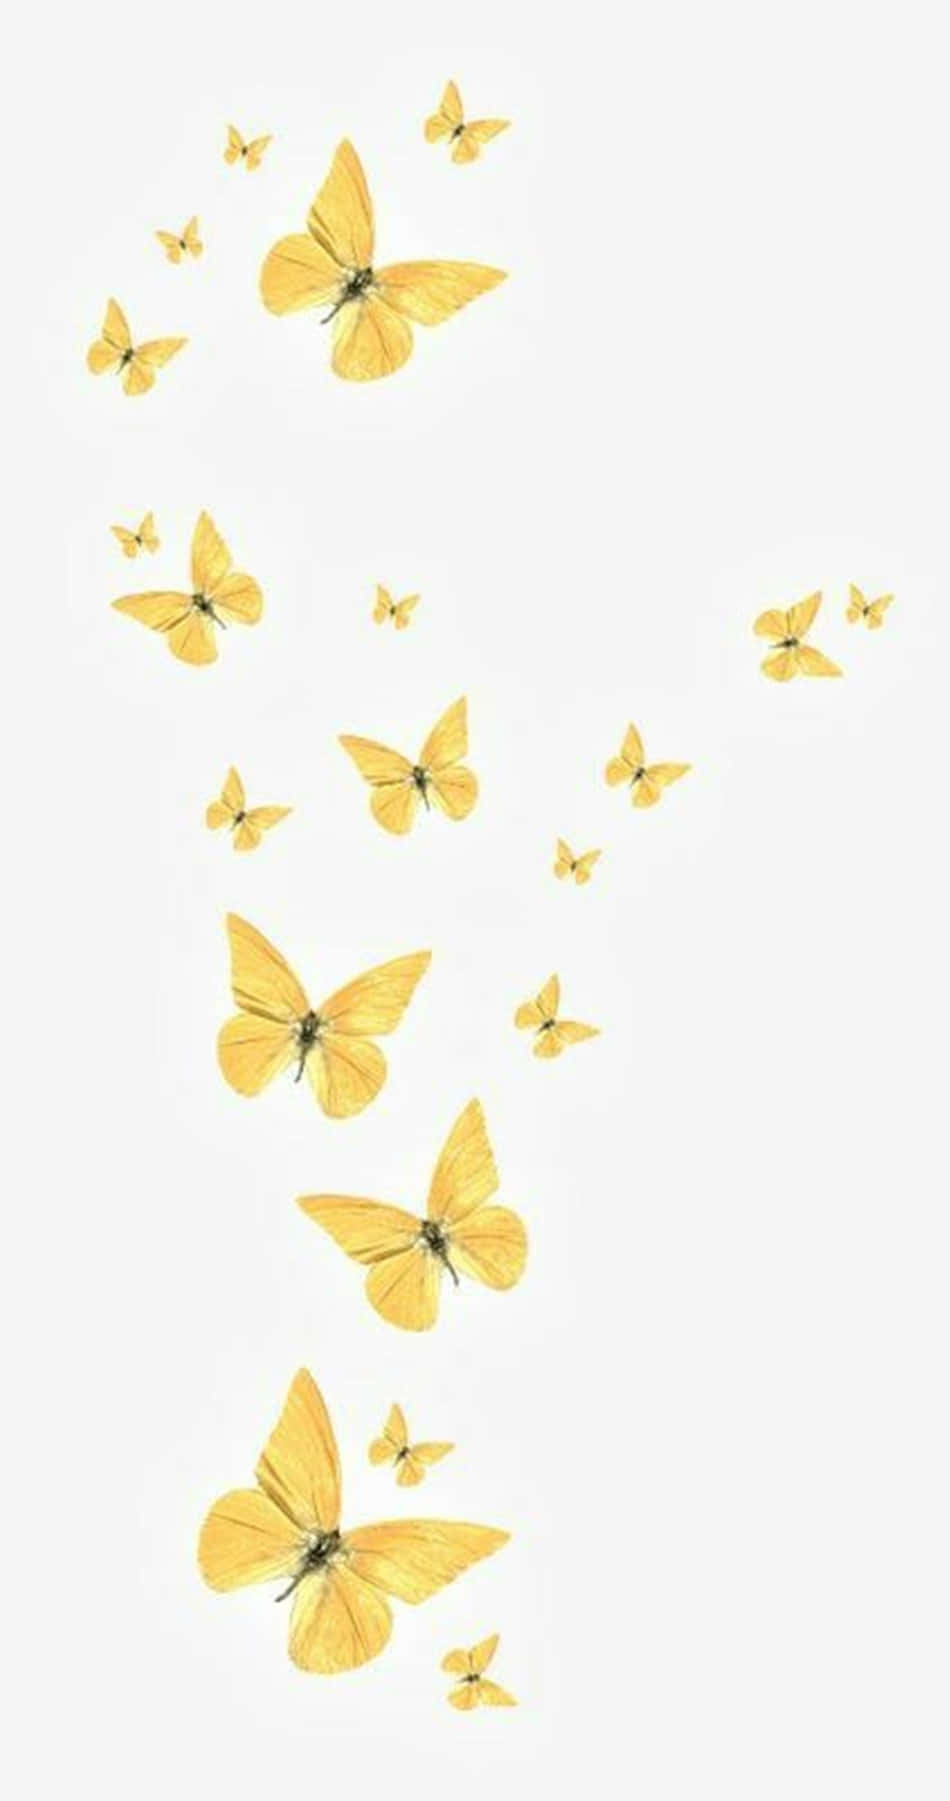 Two energetic yellow butterflies looking for a fresh start. Wallpaper